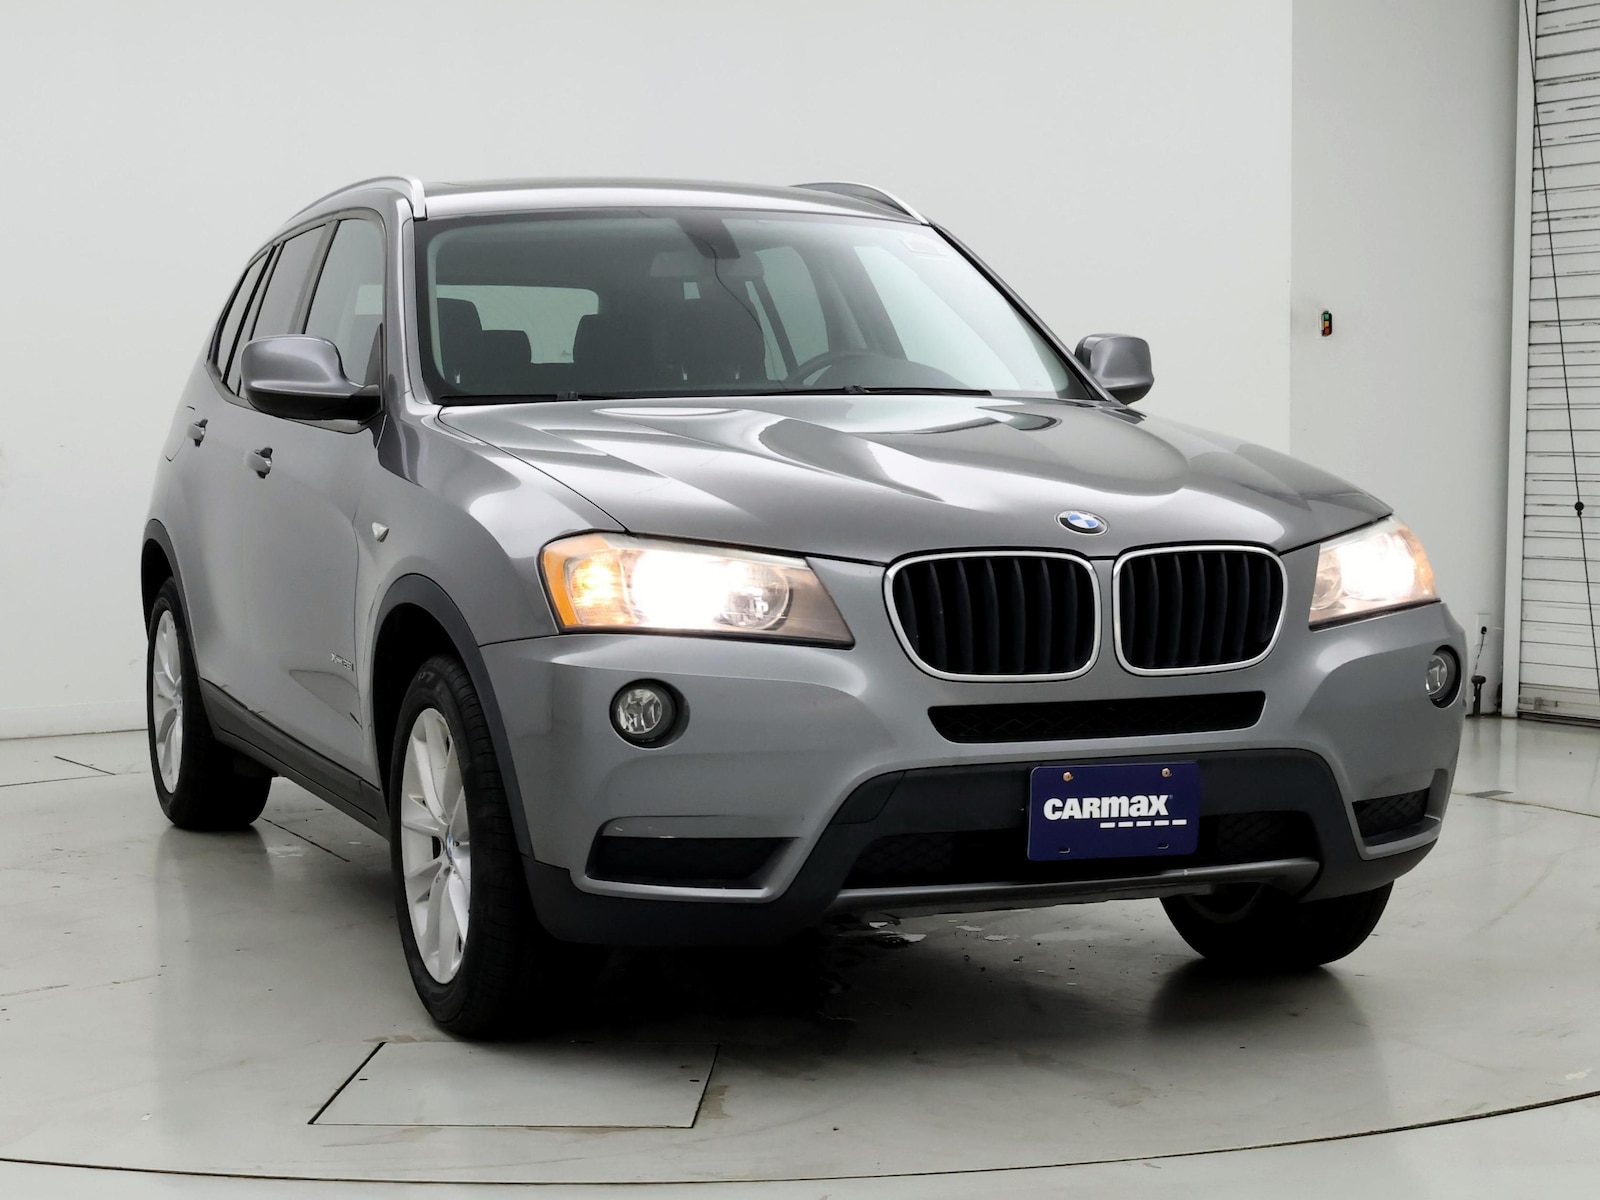 Used 2013 BMW X3 xDrive28i with VIN 5UXWX9C53DL874461 for sale in Spokane Valley, WA